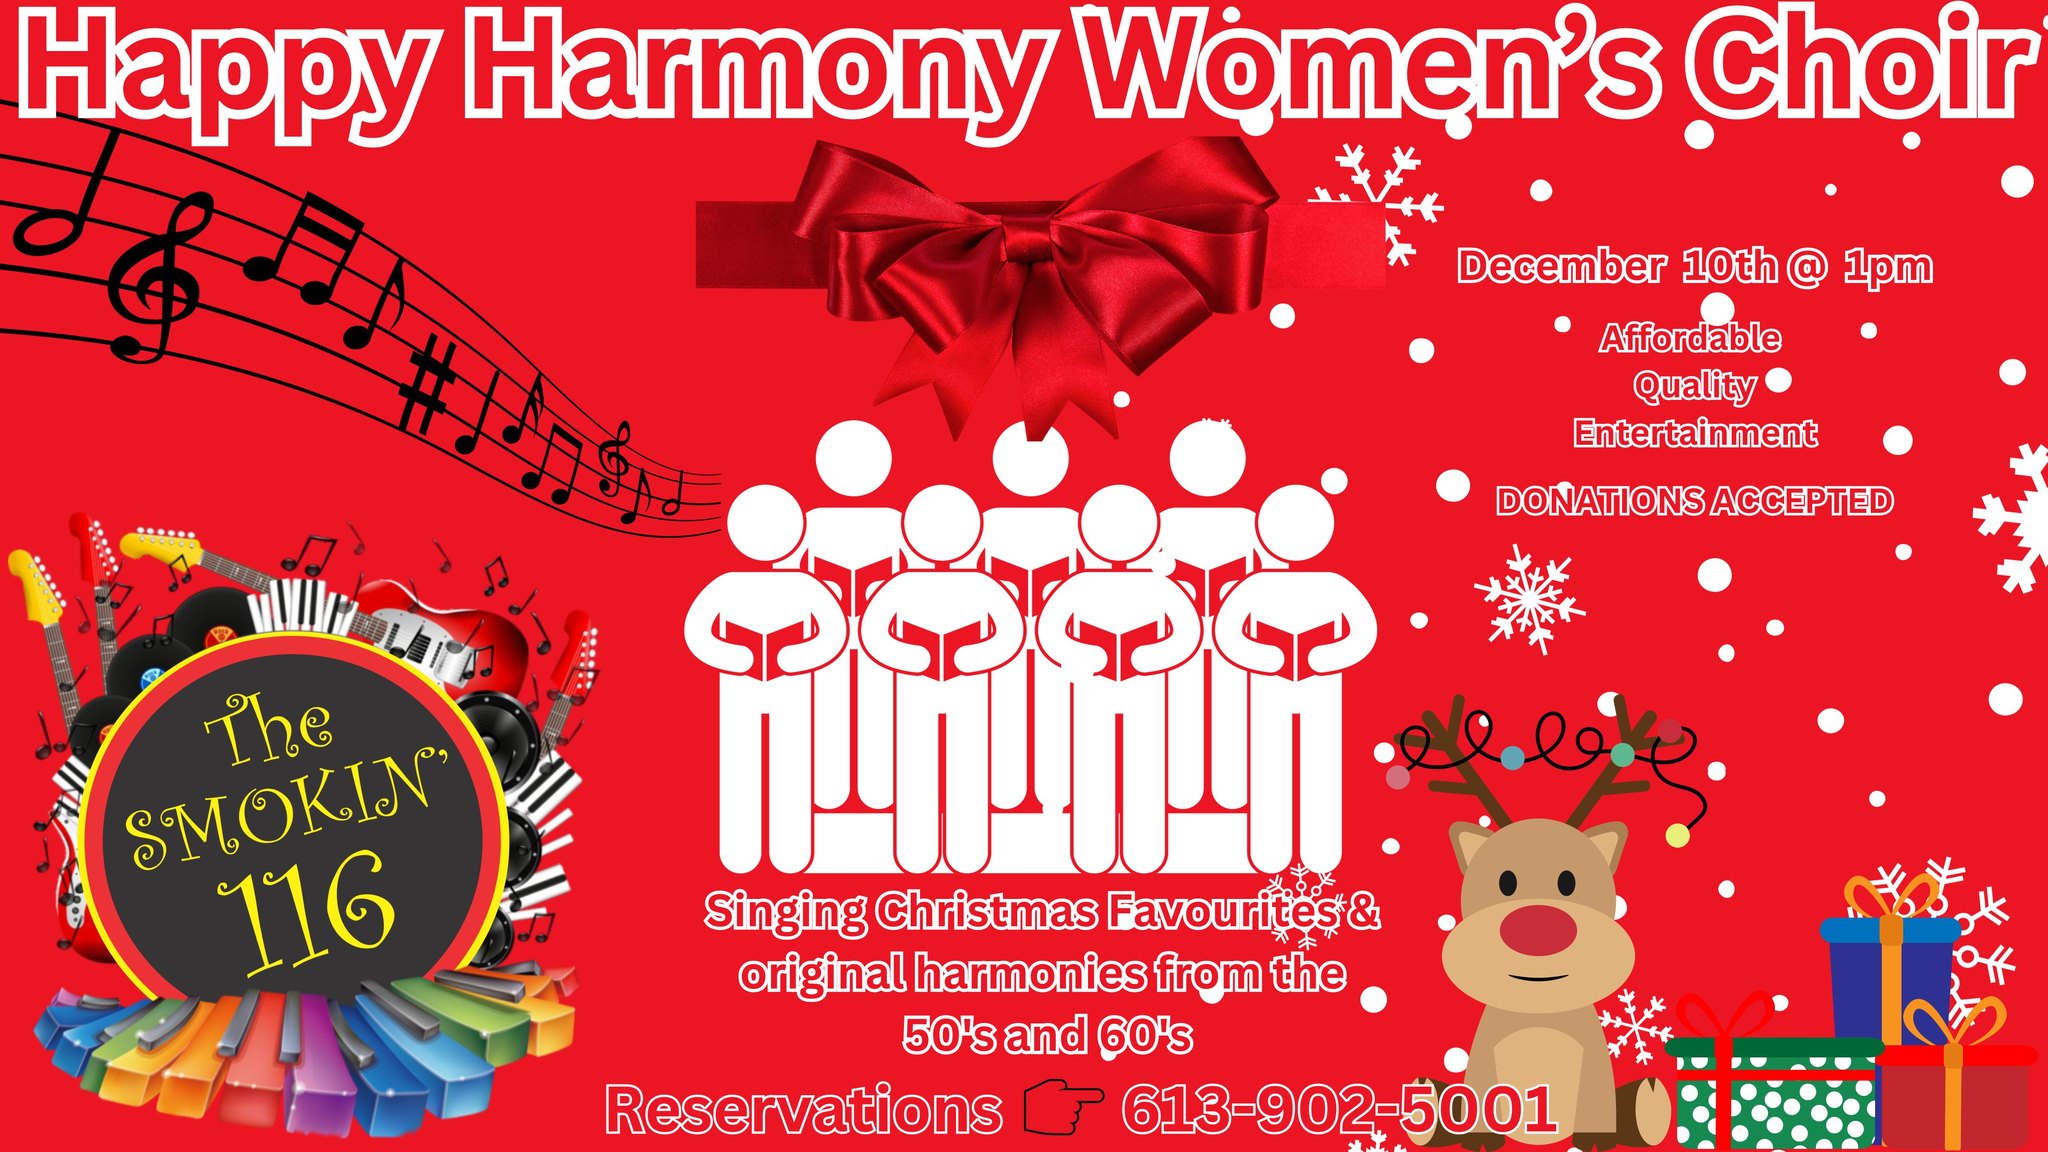 Christmas themed poster of event with graphics of music notes, reindeer, choir and a bow.